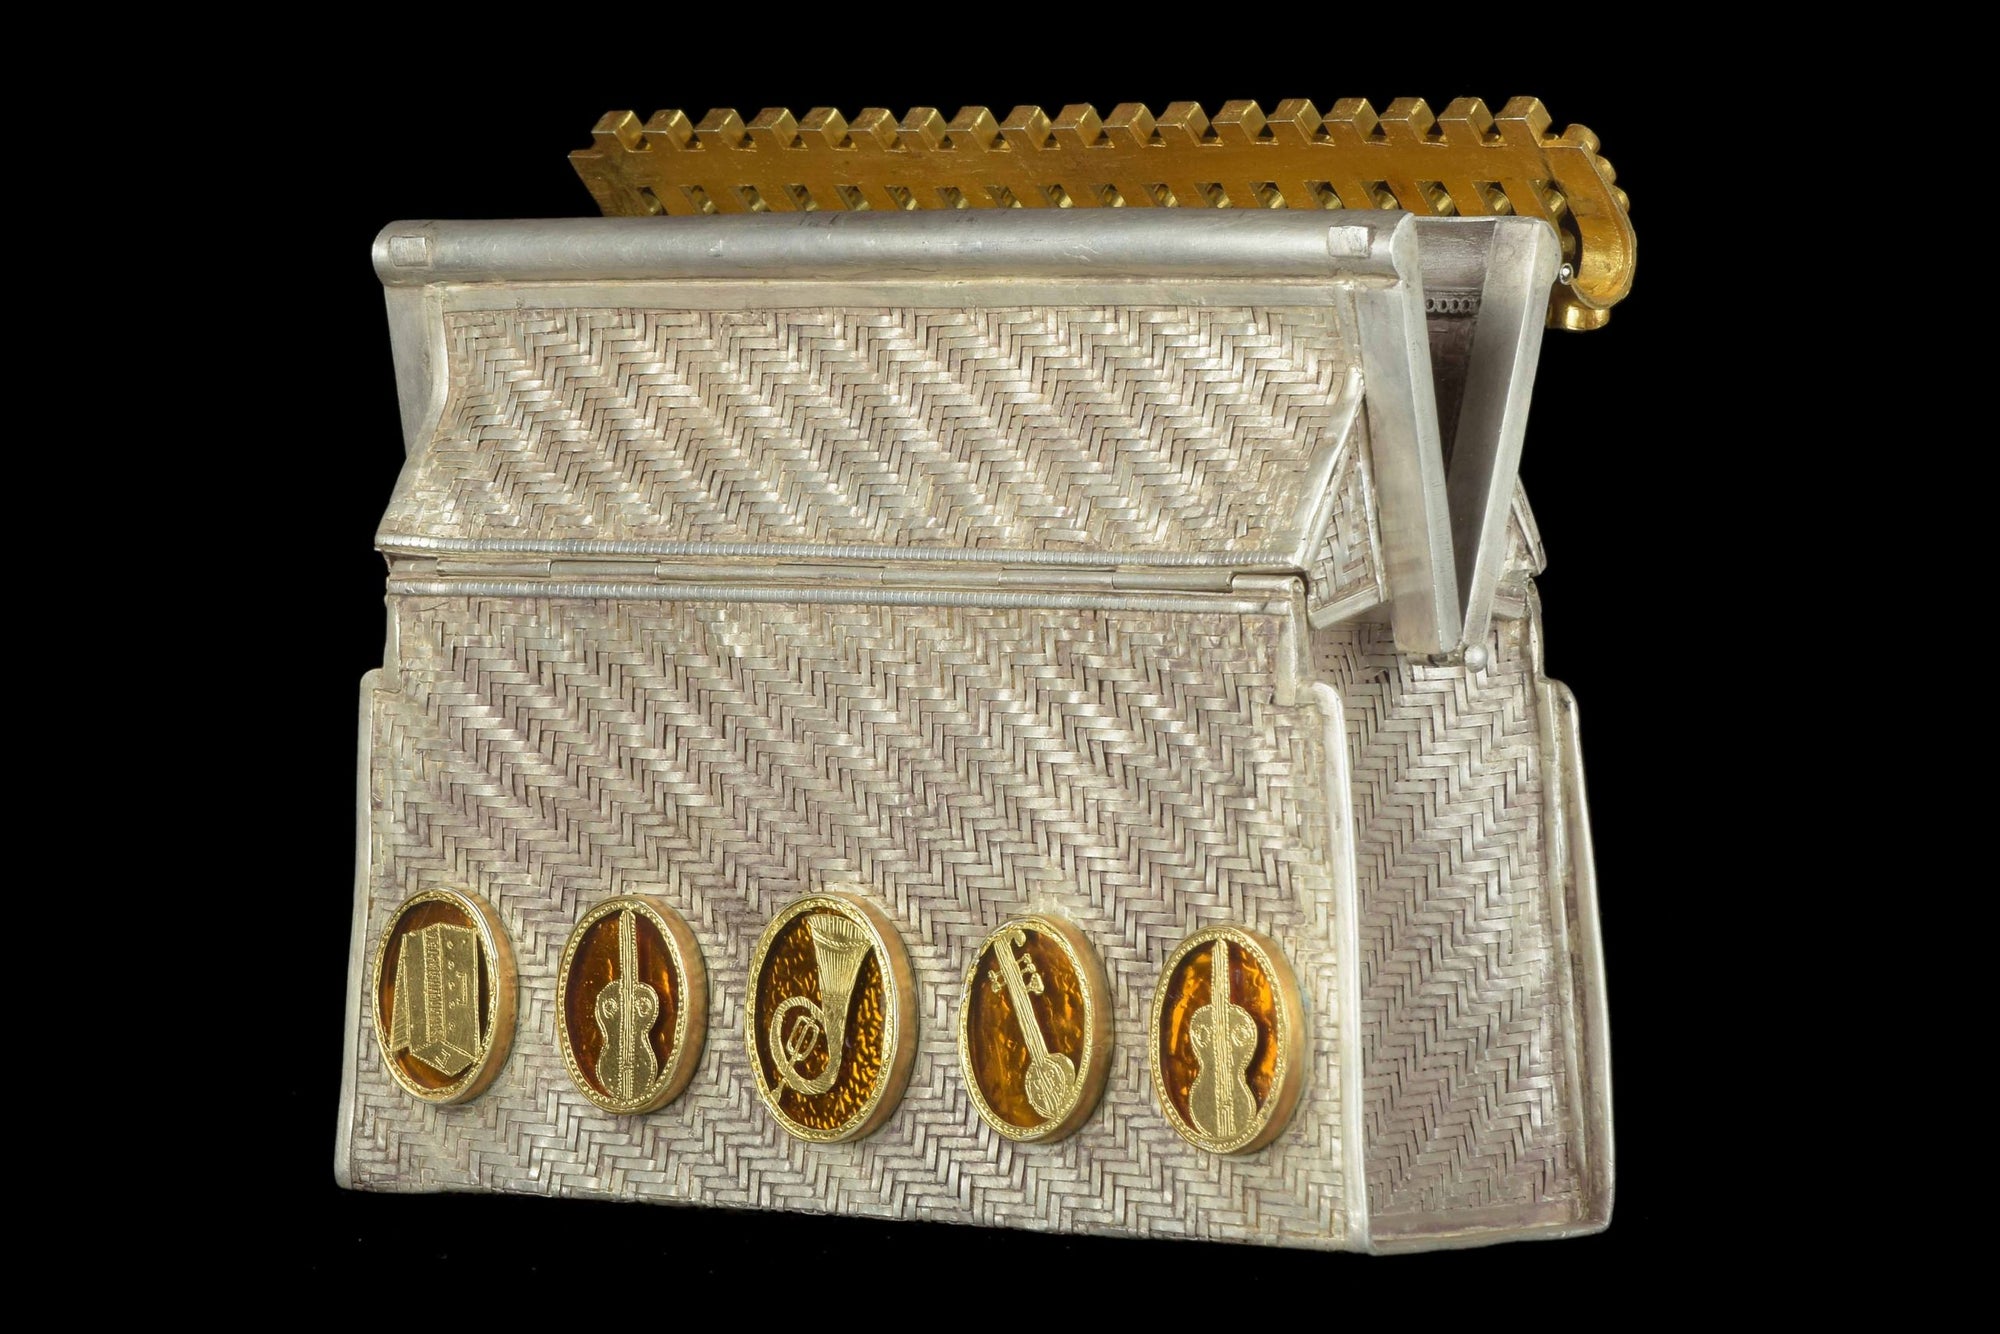 Carry An Elegant Touch With An Indo-Victorian Clutch